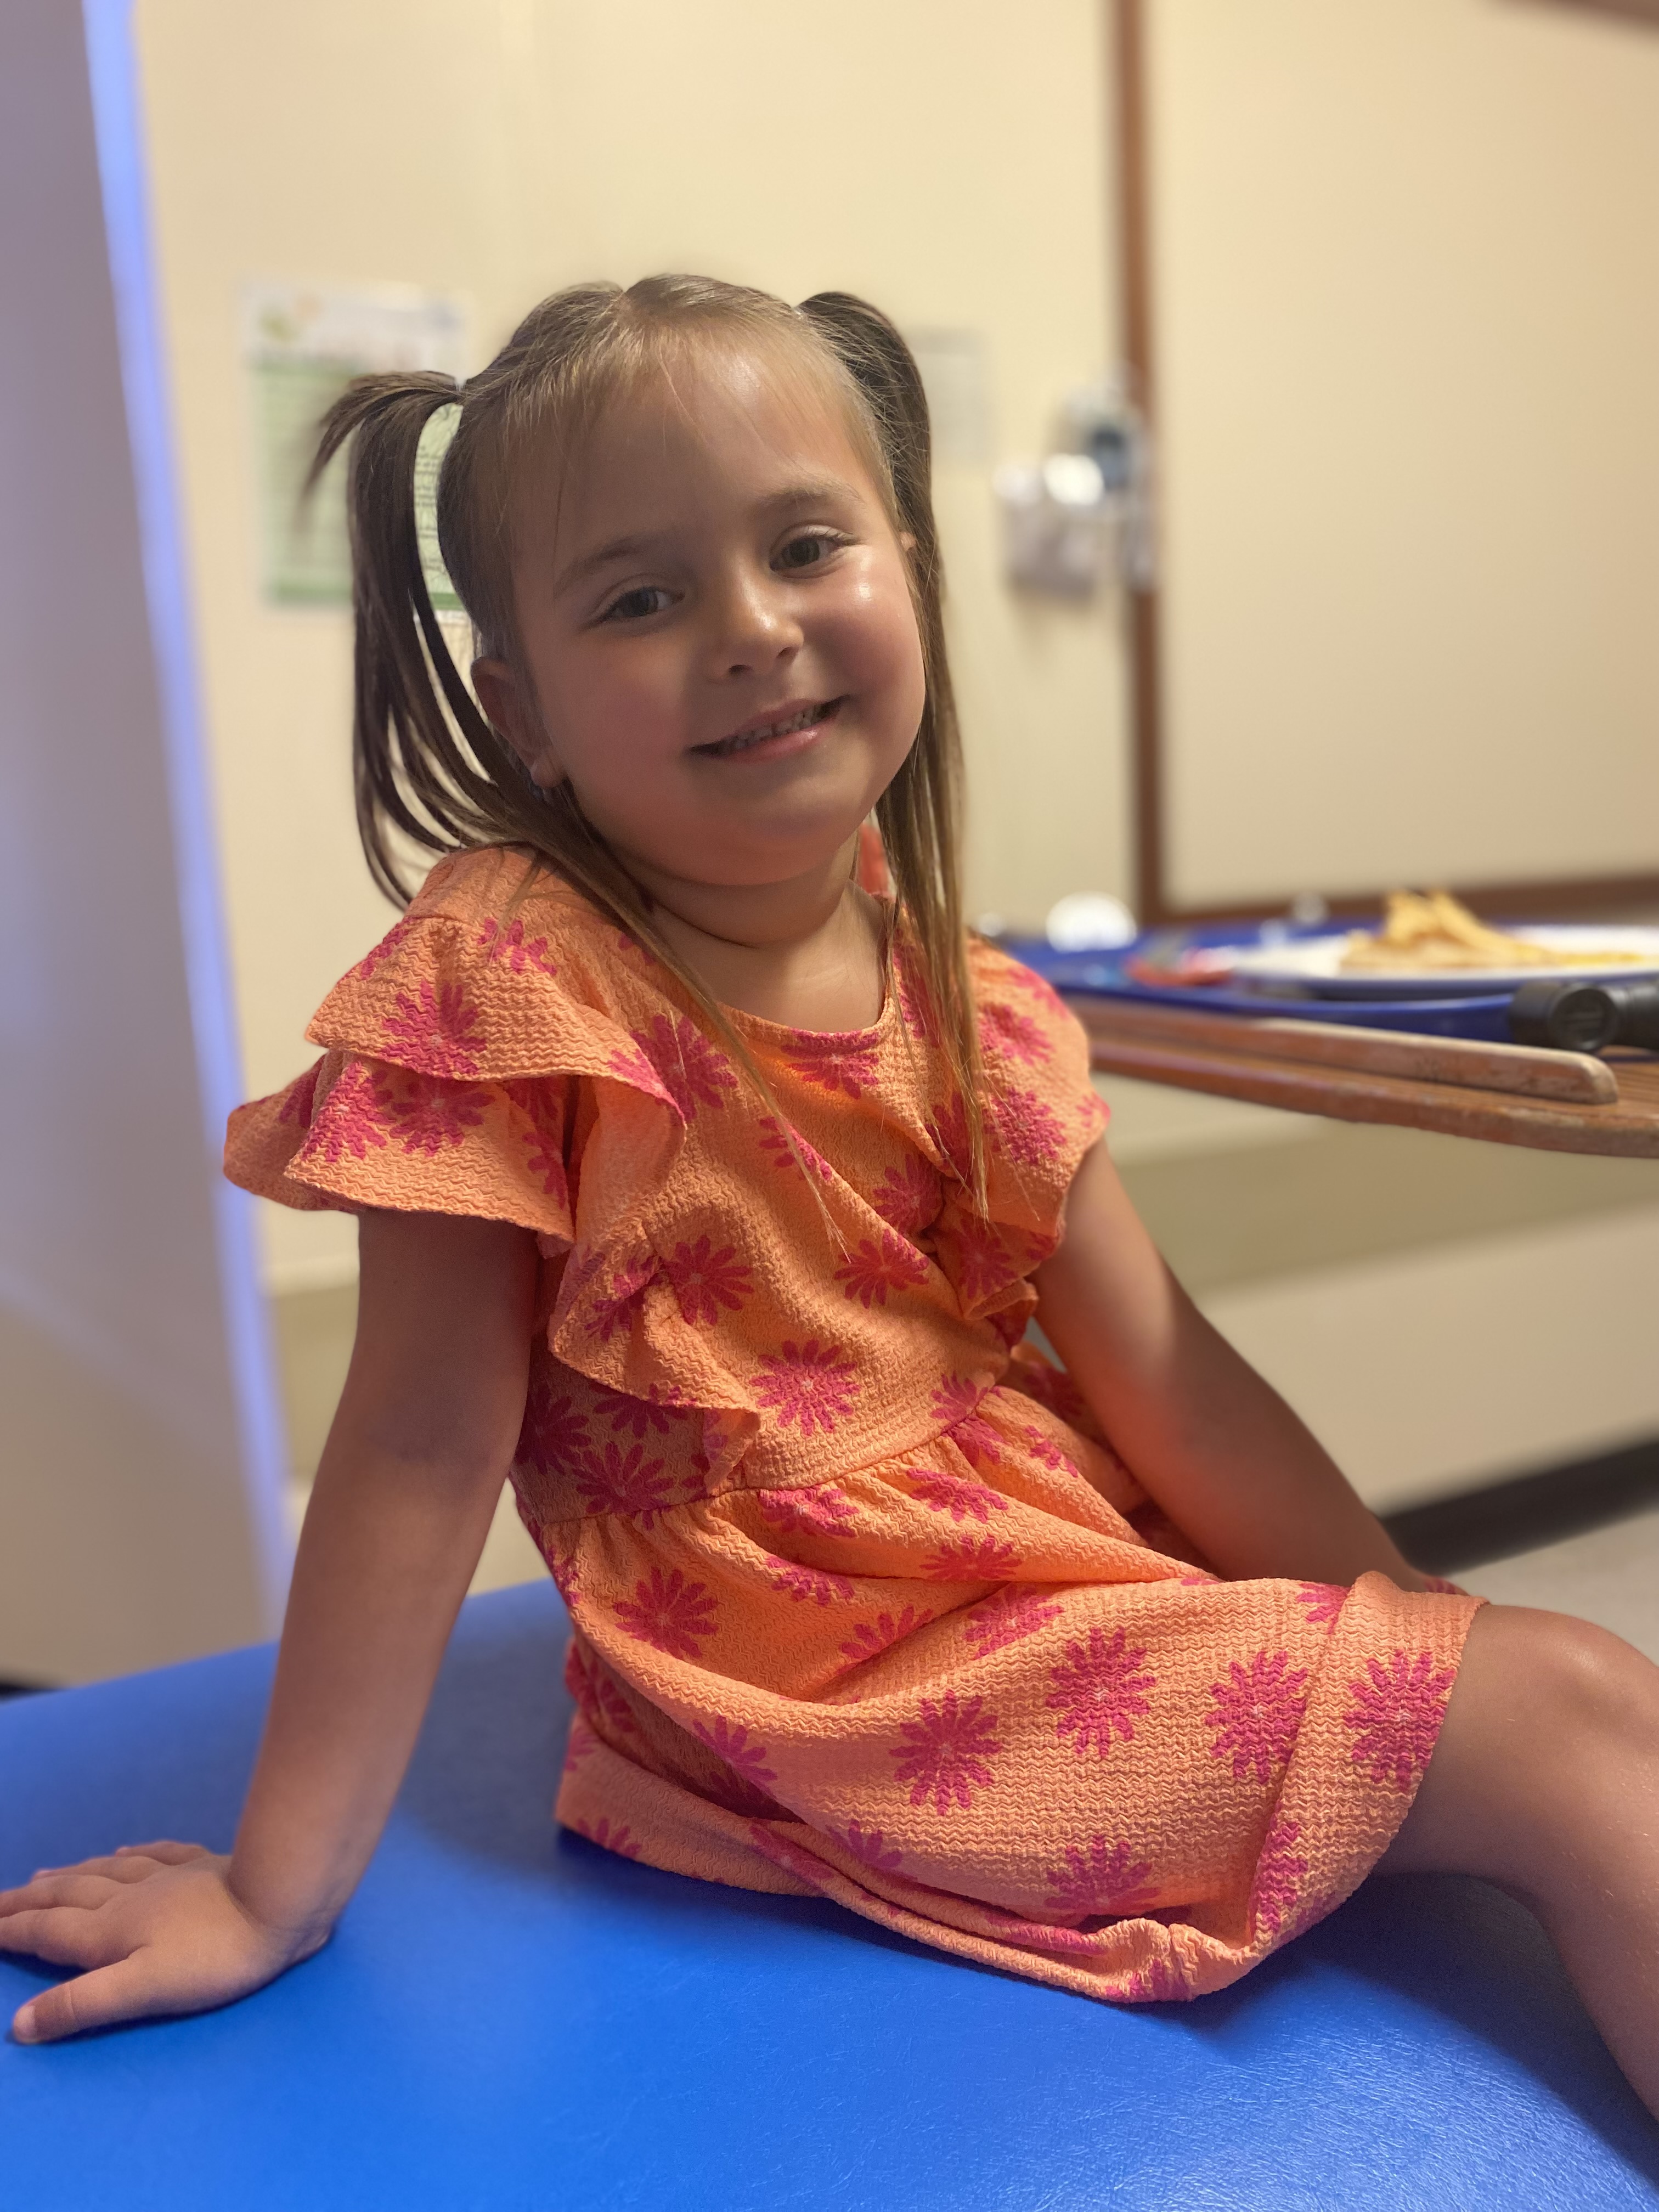 Routine Eye Test Uncovers Life-Threatening Brain Tumor in Six-Year-Old Girl, Saving Her Life